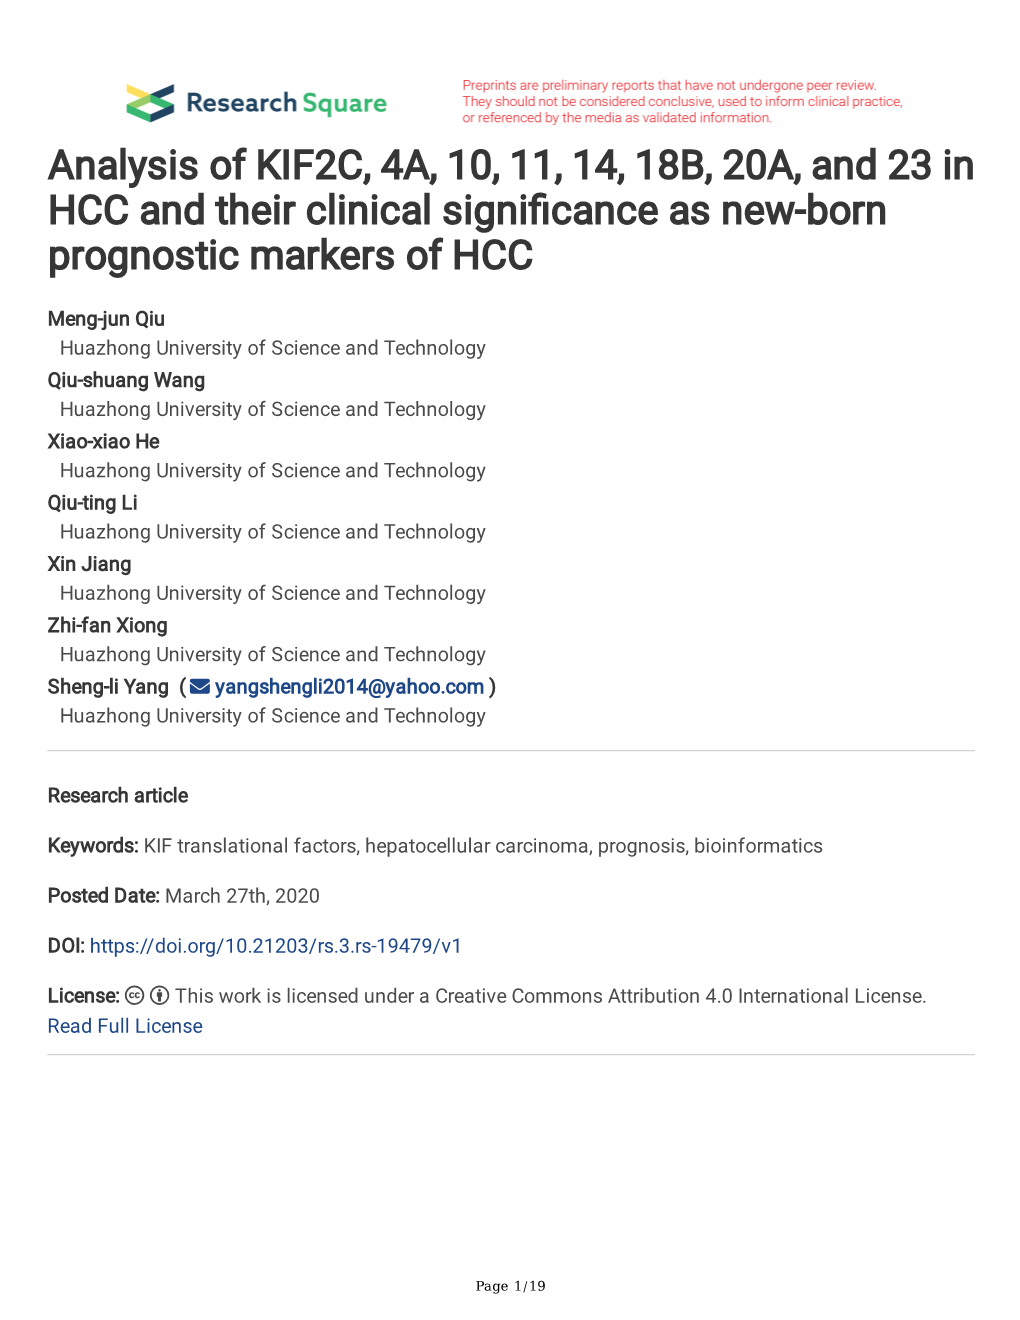 Analysis of KIF2C, 4A, 10, 11, 14, 18B, 20A, and 23 in HCC and Their Clinical Signifcance As New-Born Prognostic Markers of HCC